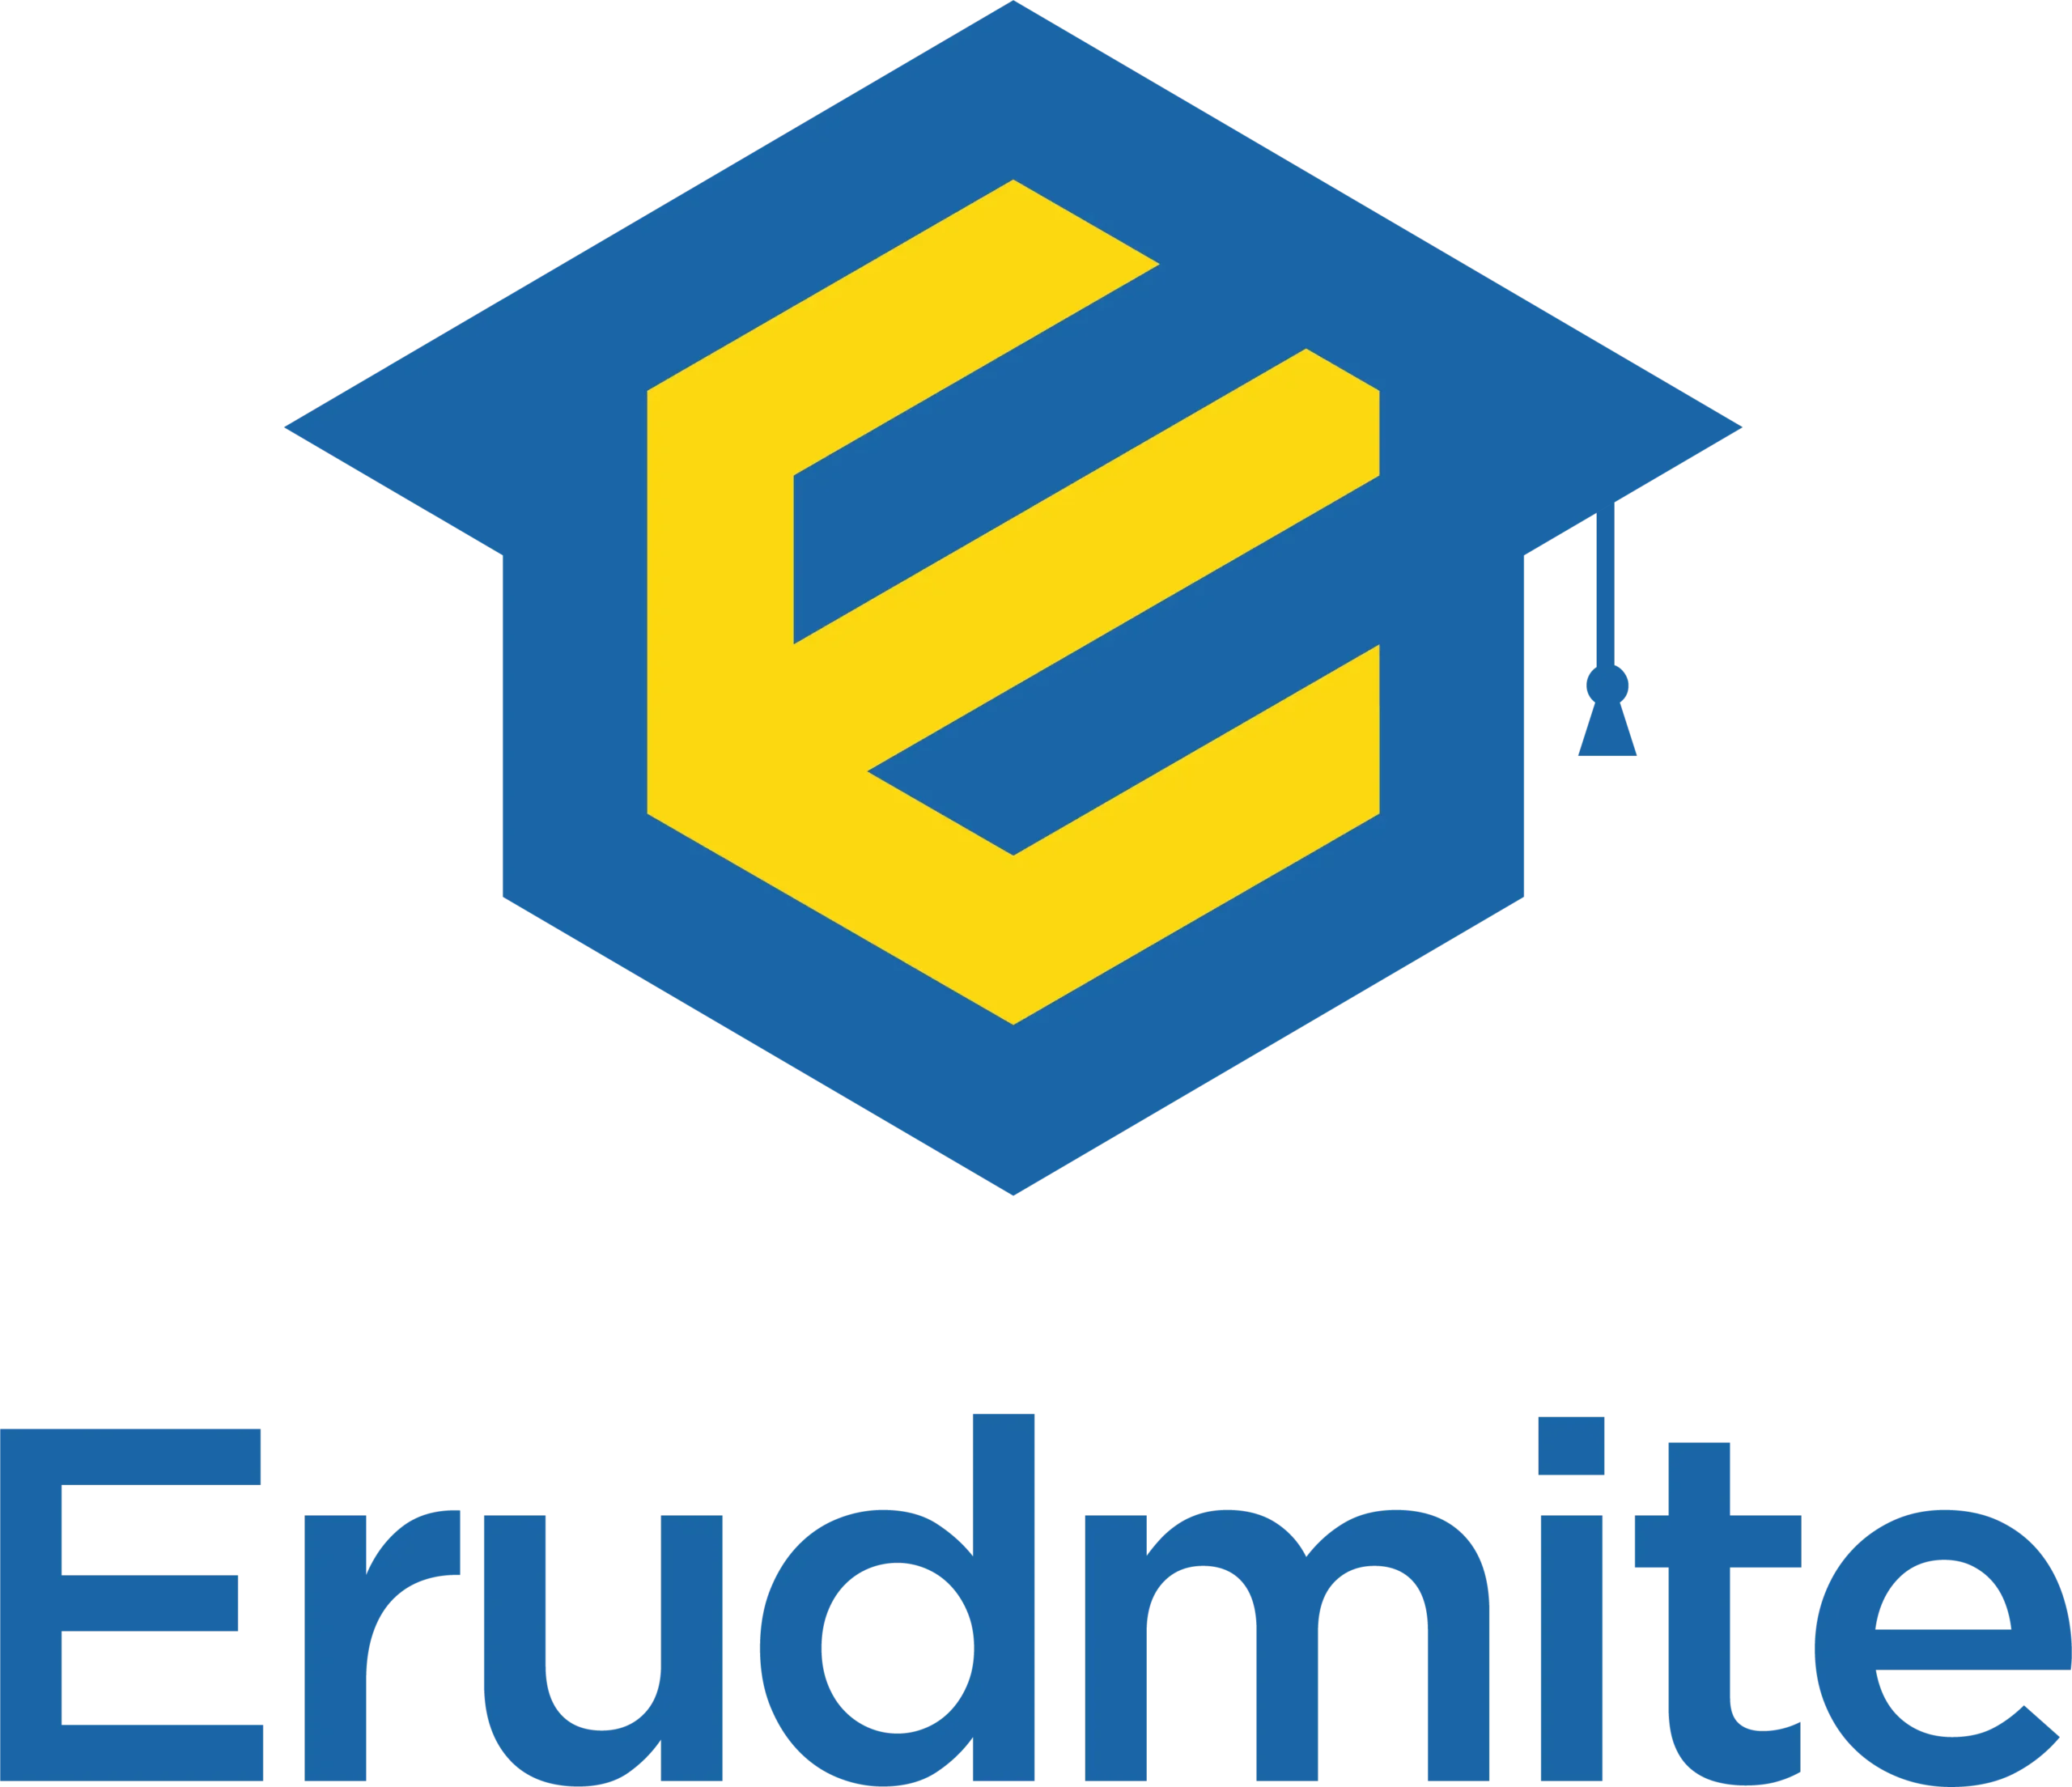 Erudmite is a project from proximite